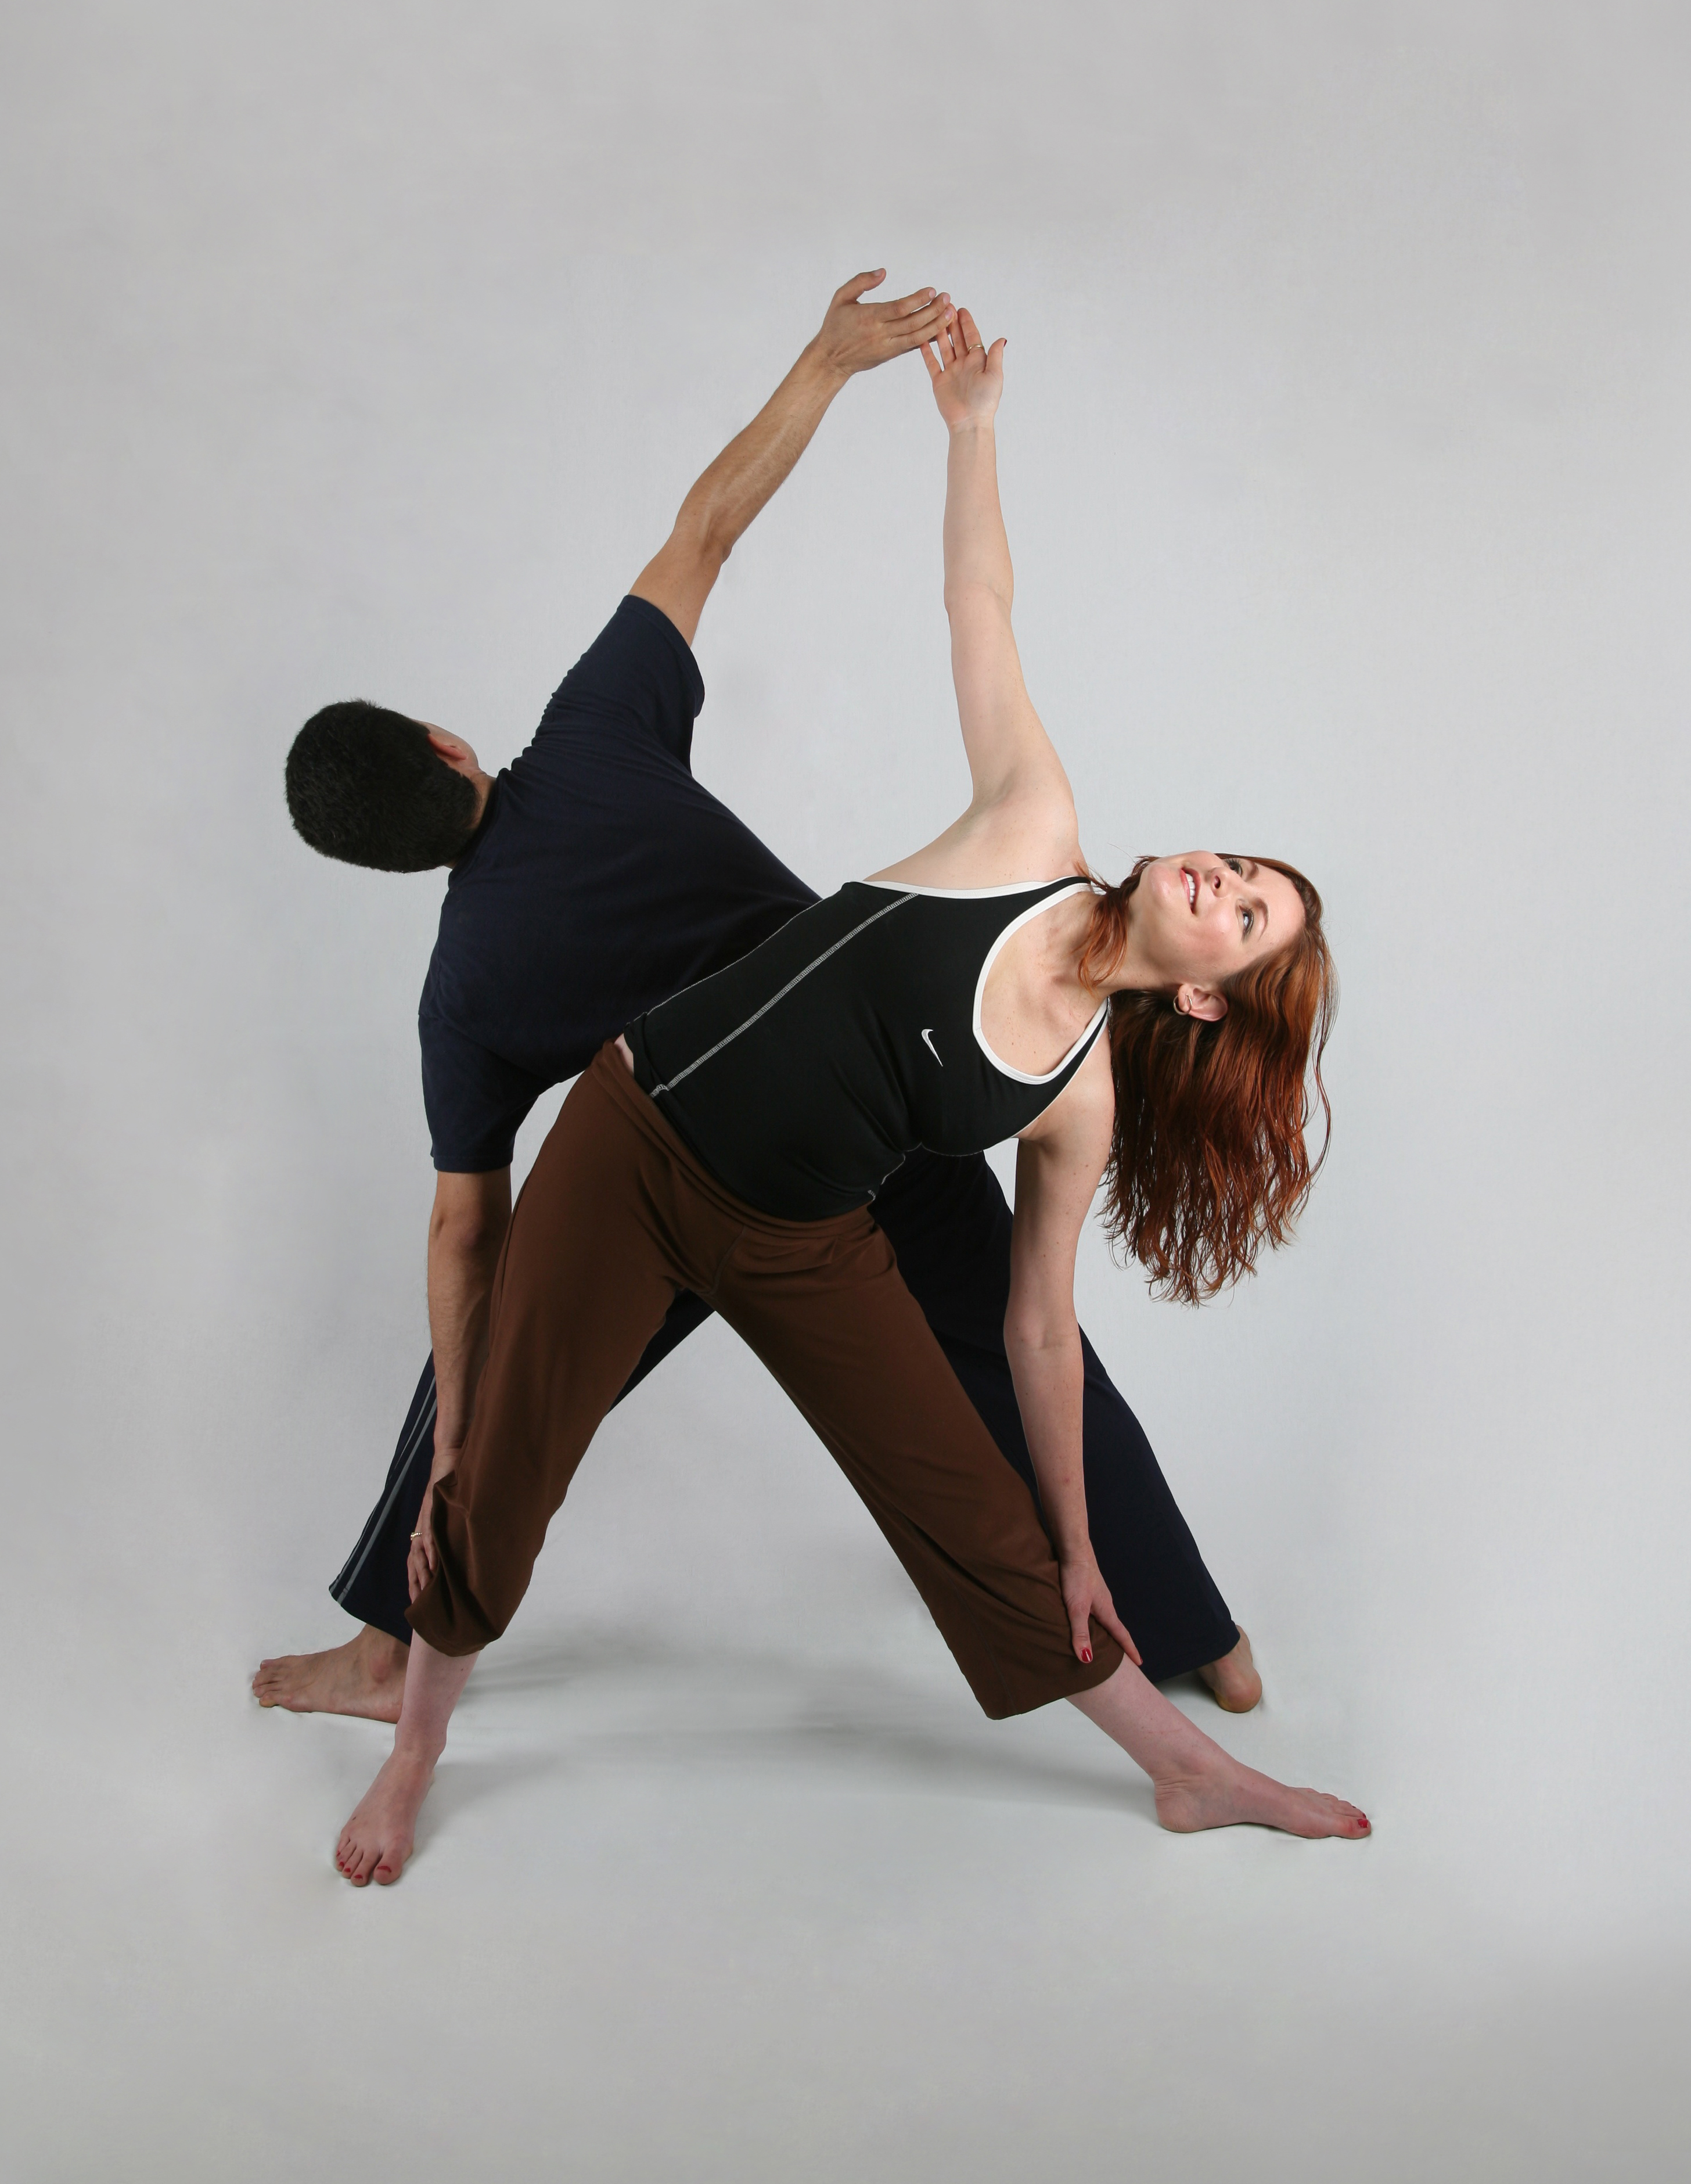 Try Partner Yoga For a Unique Valentine's Day Treat - Yoga Journal